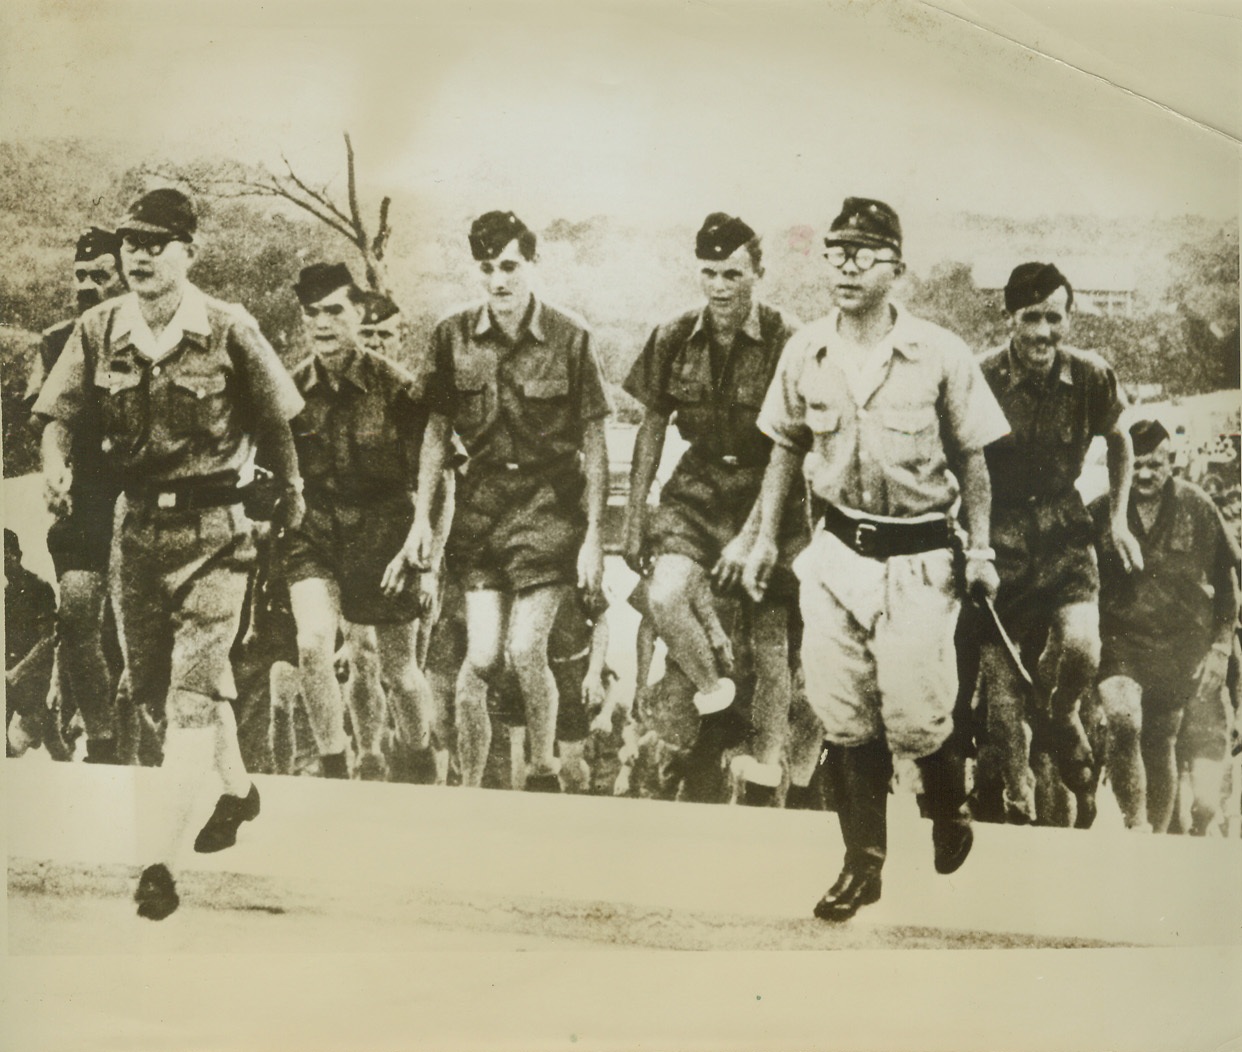 ”SUPERMEN” OF THE EAST AND WEST, 12/13/1943. SINGAPORE – Two Japanese officers lead a party of German soldiers on a sight-seeing tour of the great Jap naval base at Singapore. Base is under the command of General Yamashita and a number of Nazi soldiers are stationed there, forming part of the garrison at the former British “Gibraltar of the East.” Credit: ACME;